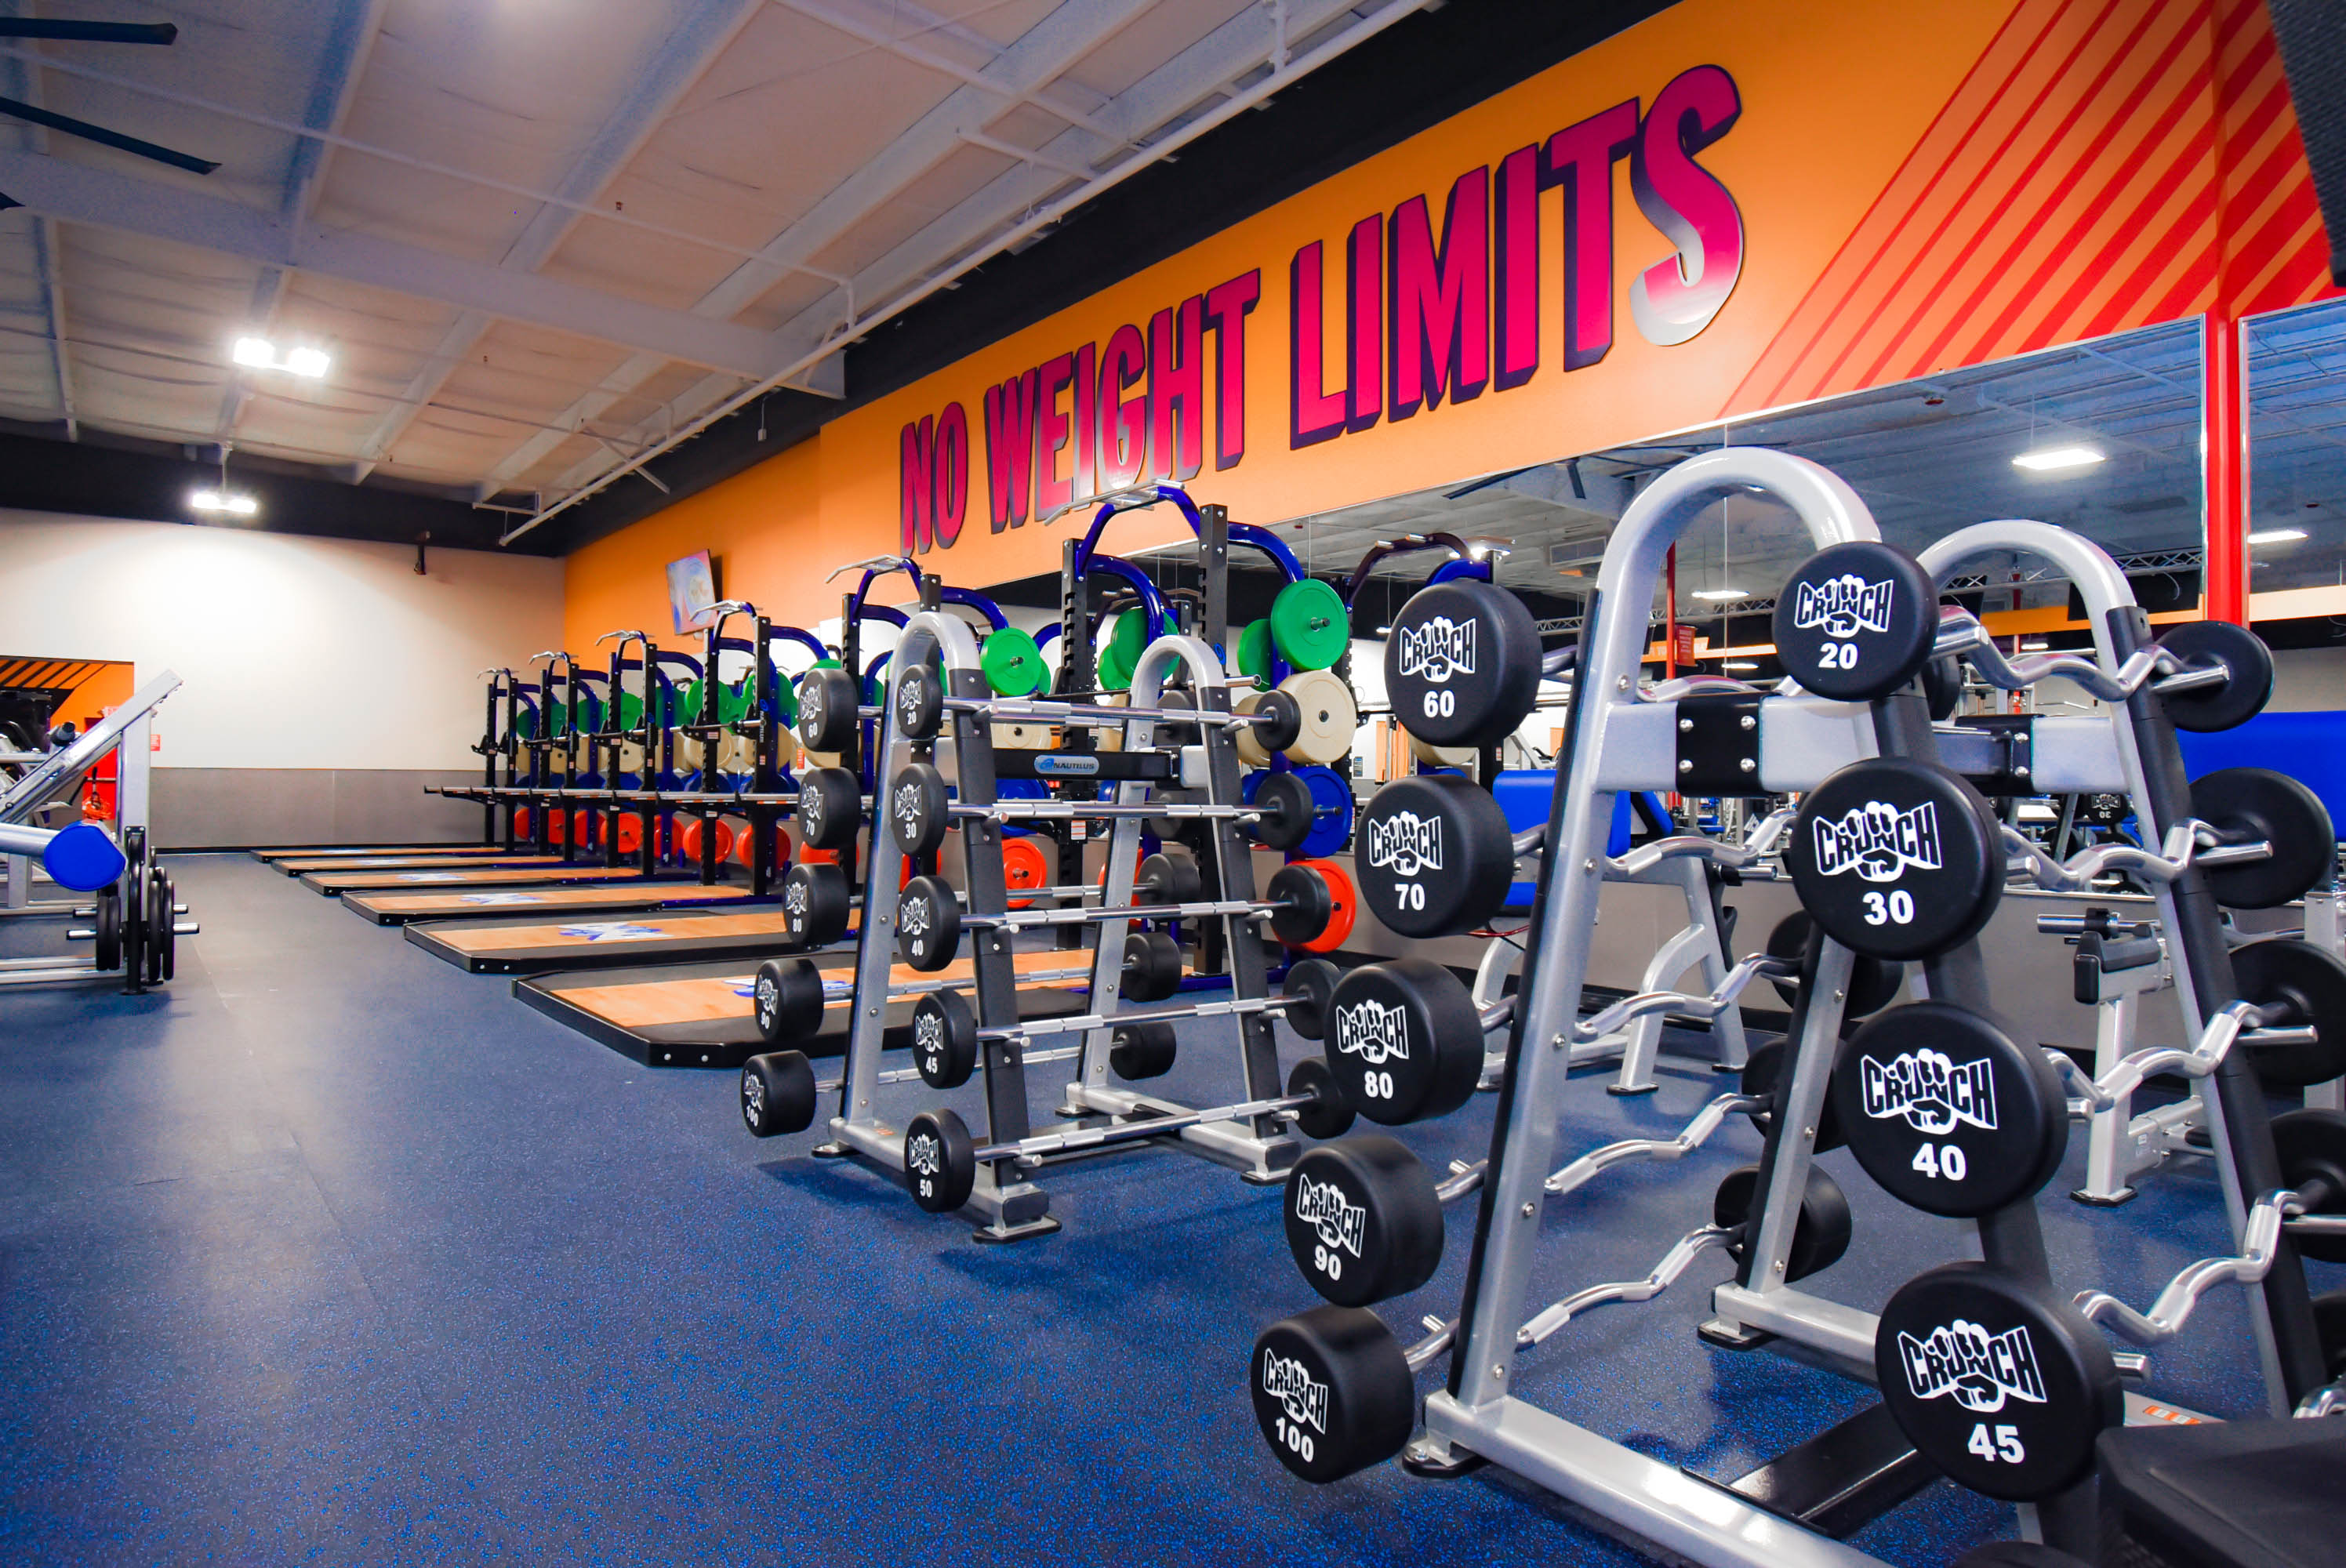 Crunch Franchisee, Undefeated Tribe LLC, Acquires Crunch Fitness Location  in San Antonio